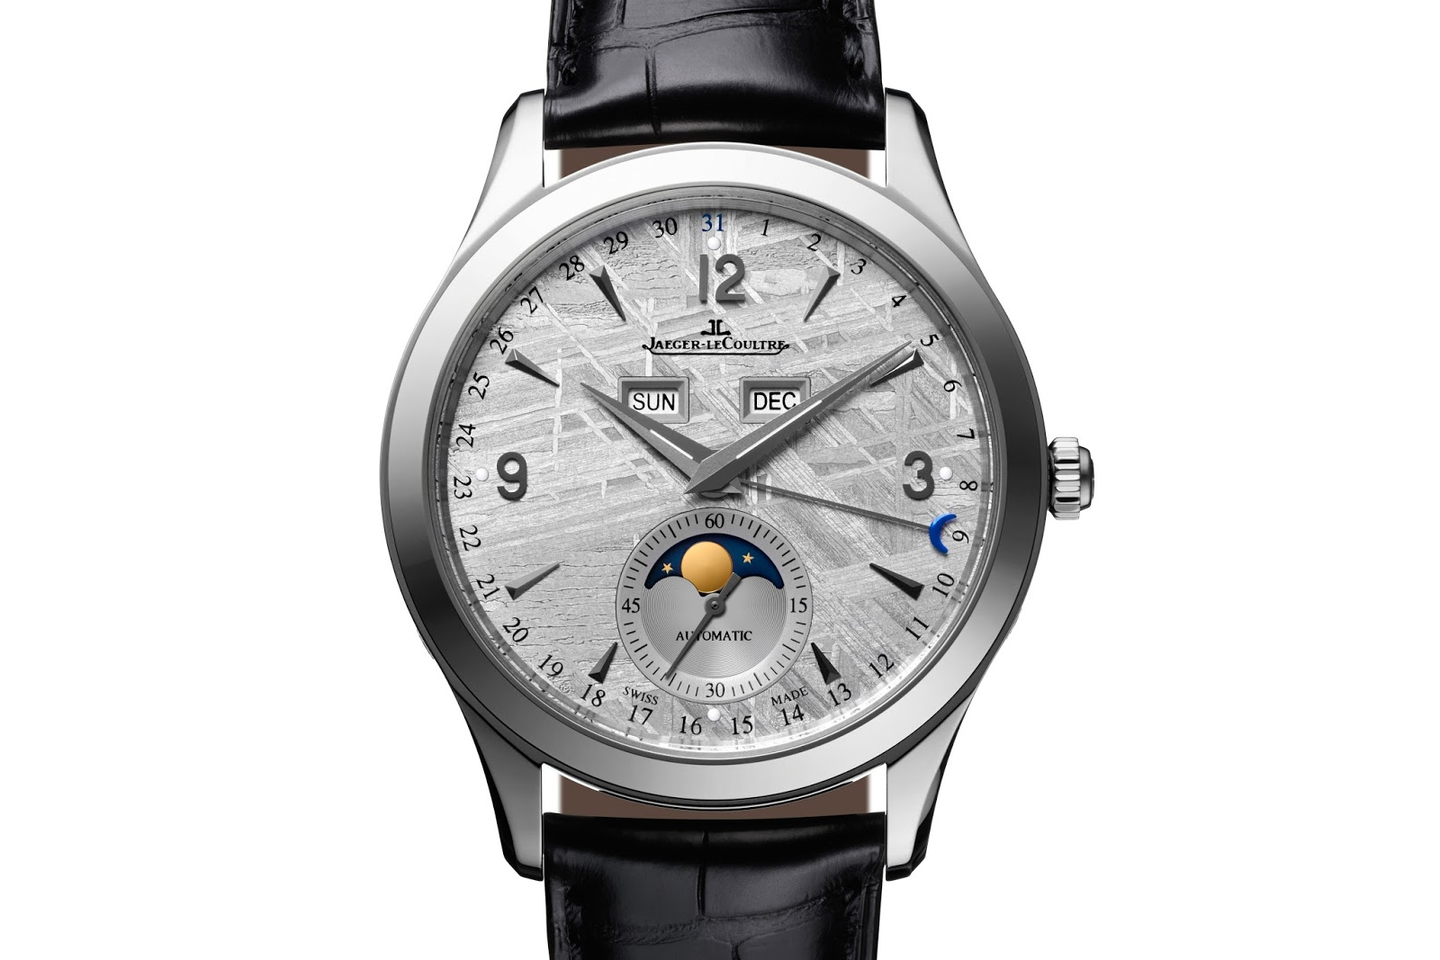 SIHH 2015: Jaeger-LeCoultre Master Calendar with meteorite dial